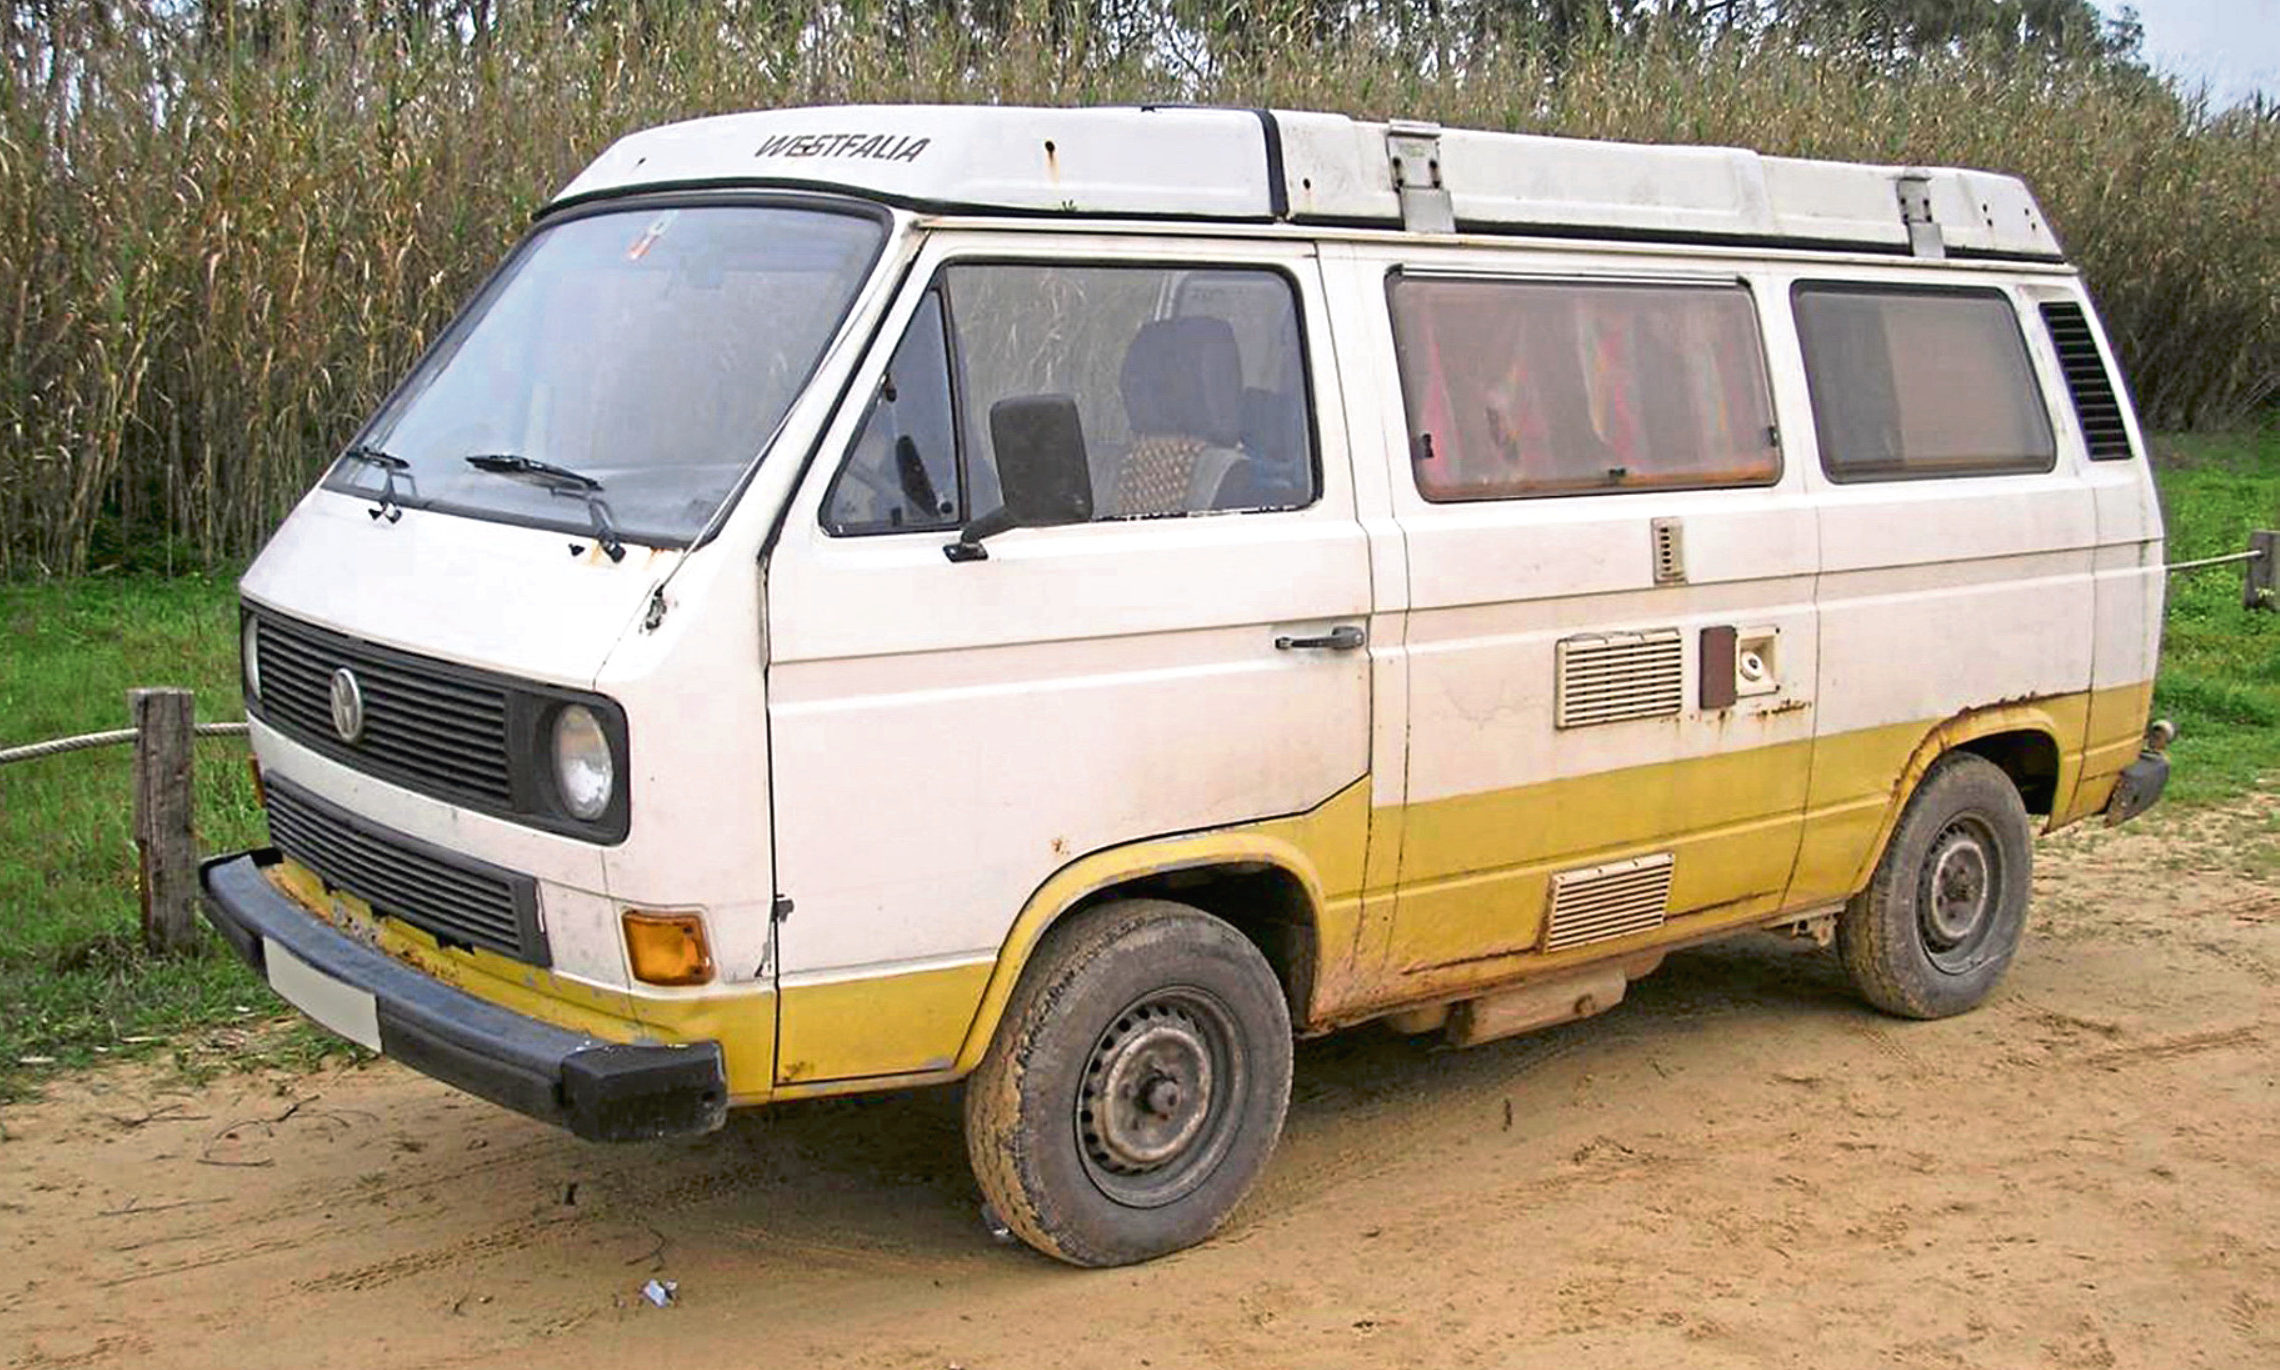 Undated handout photo issued by Metropolitan Police of a VW T3 Westfalia campervan that has been linked to the suspect in the disappearance of Madeleine McCann.